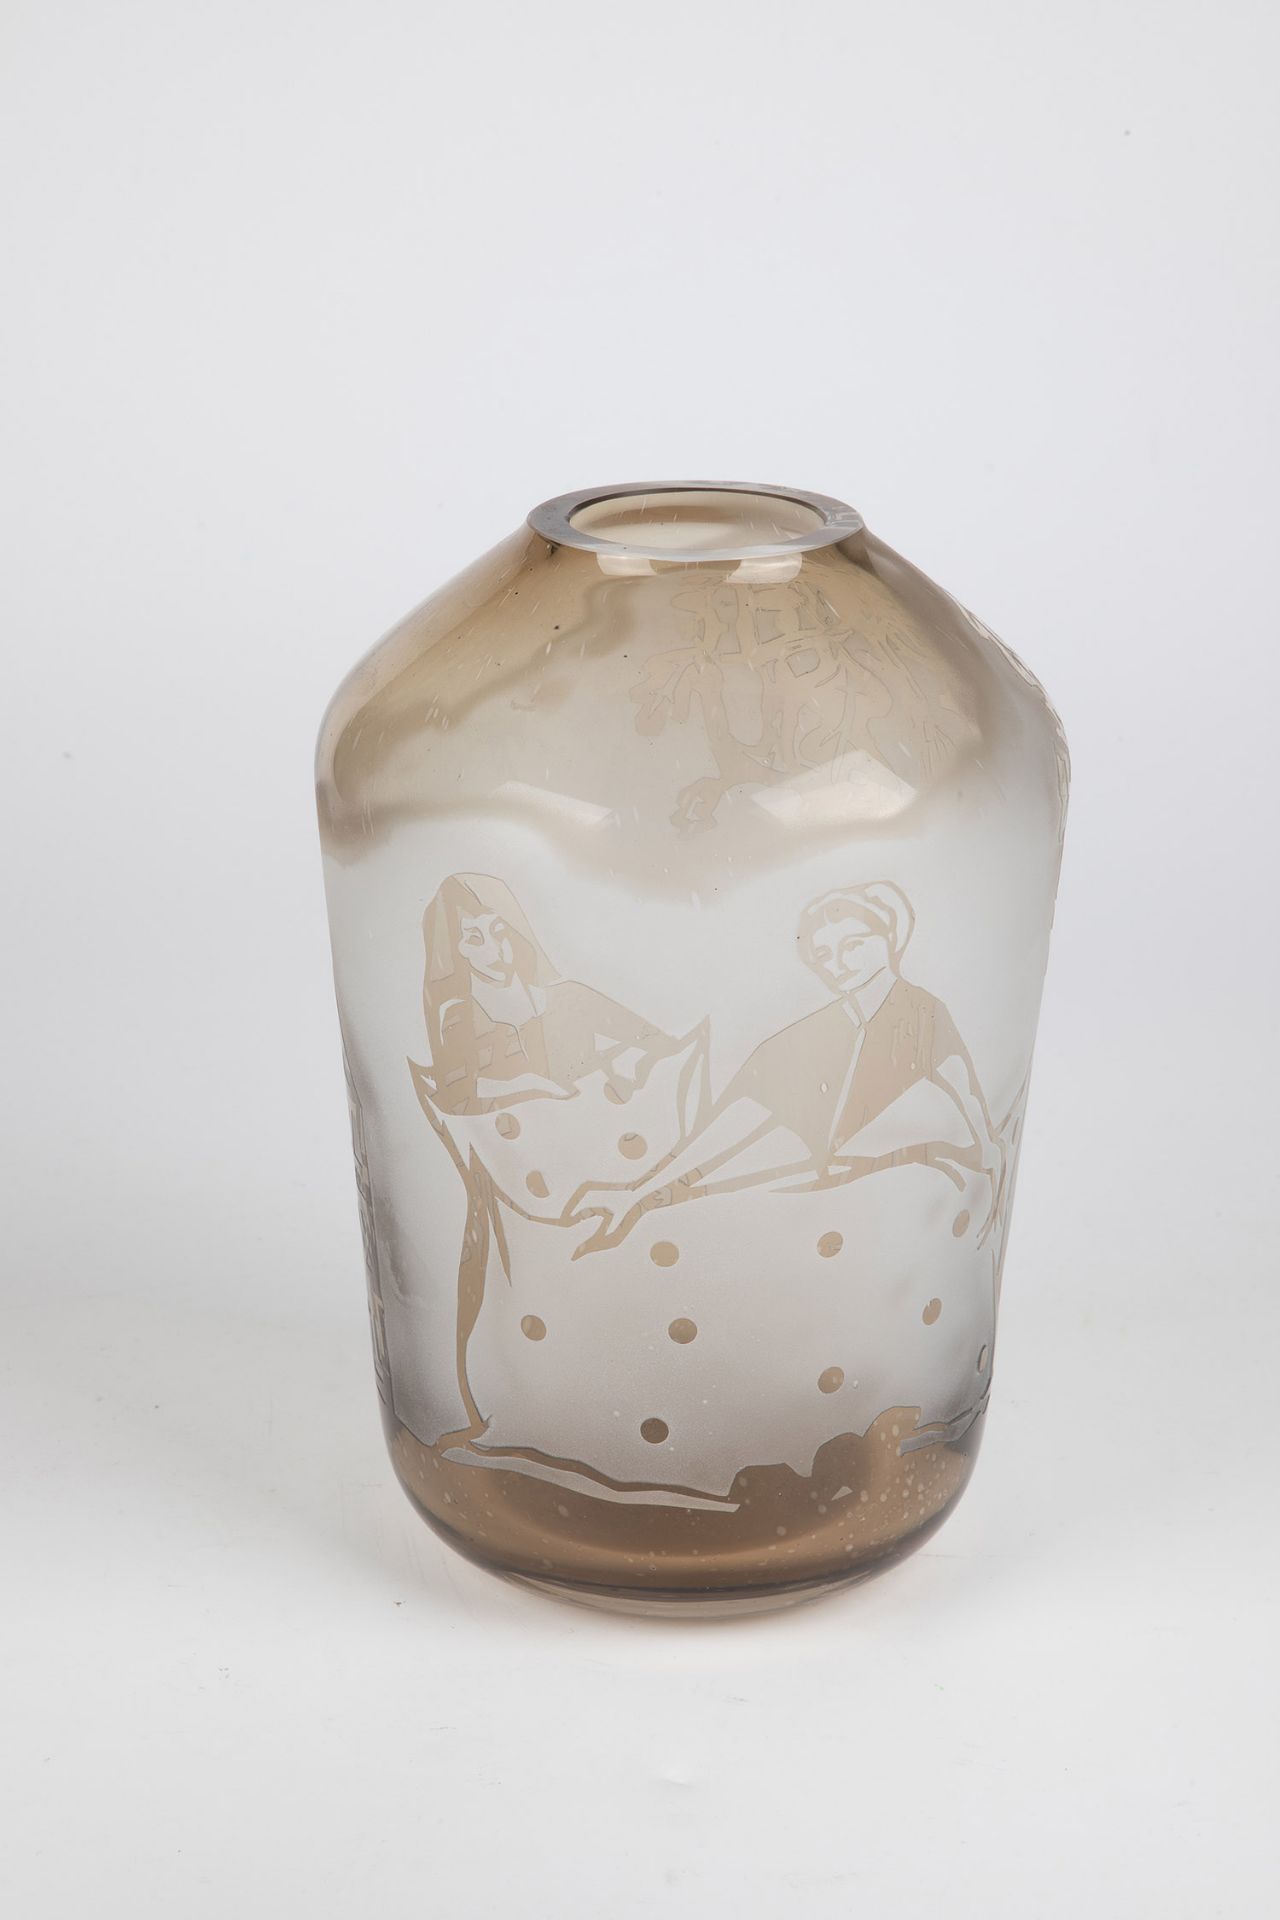 Vase Glashuette Suessmuth, Immenhausen, 1984 Colourless glass, overlaid with smoky brown. Matt